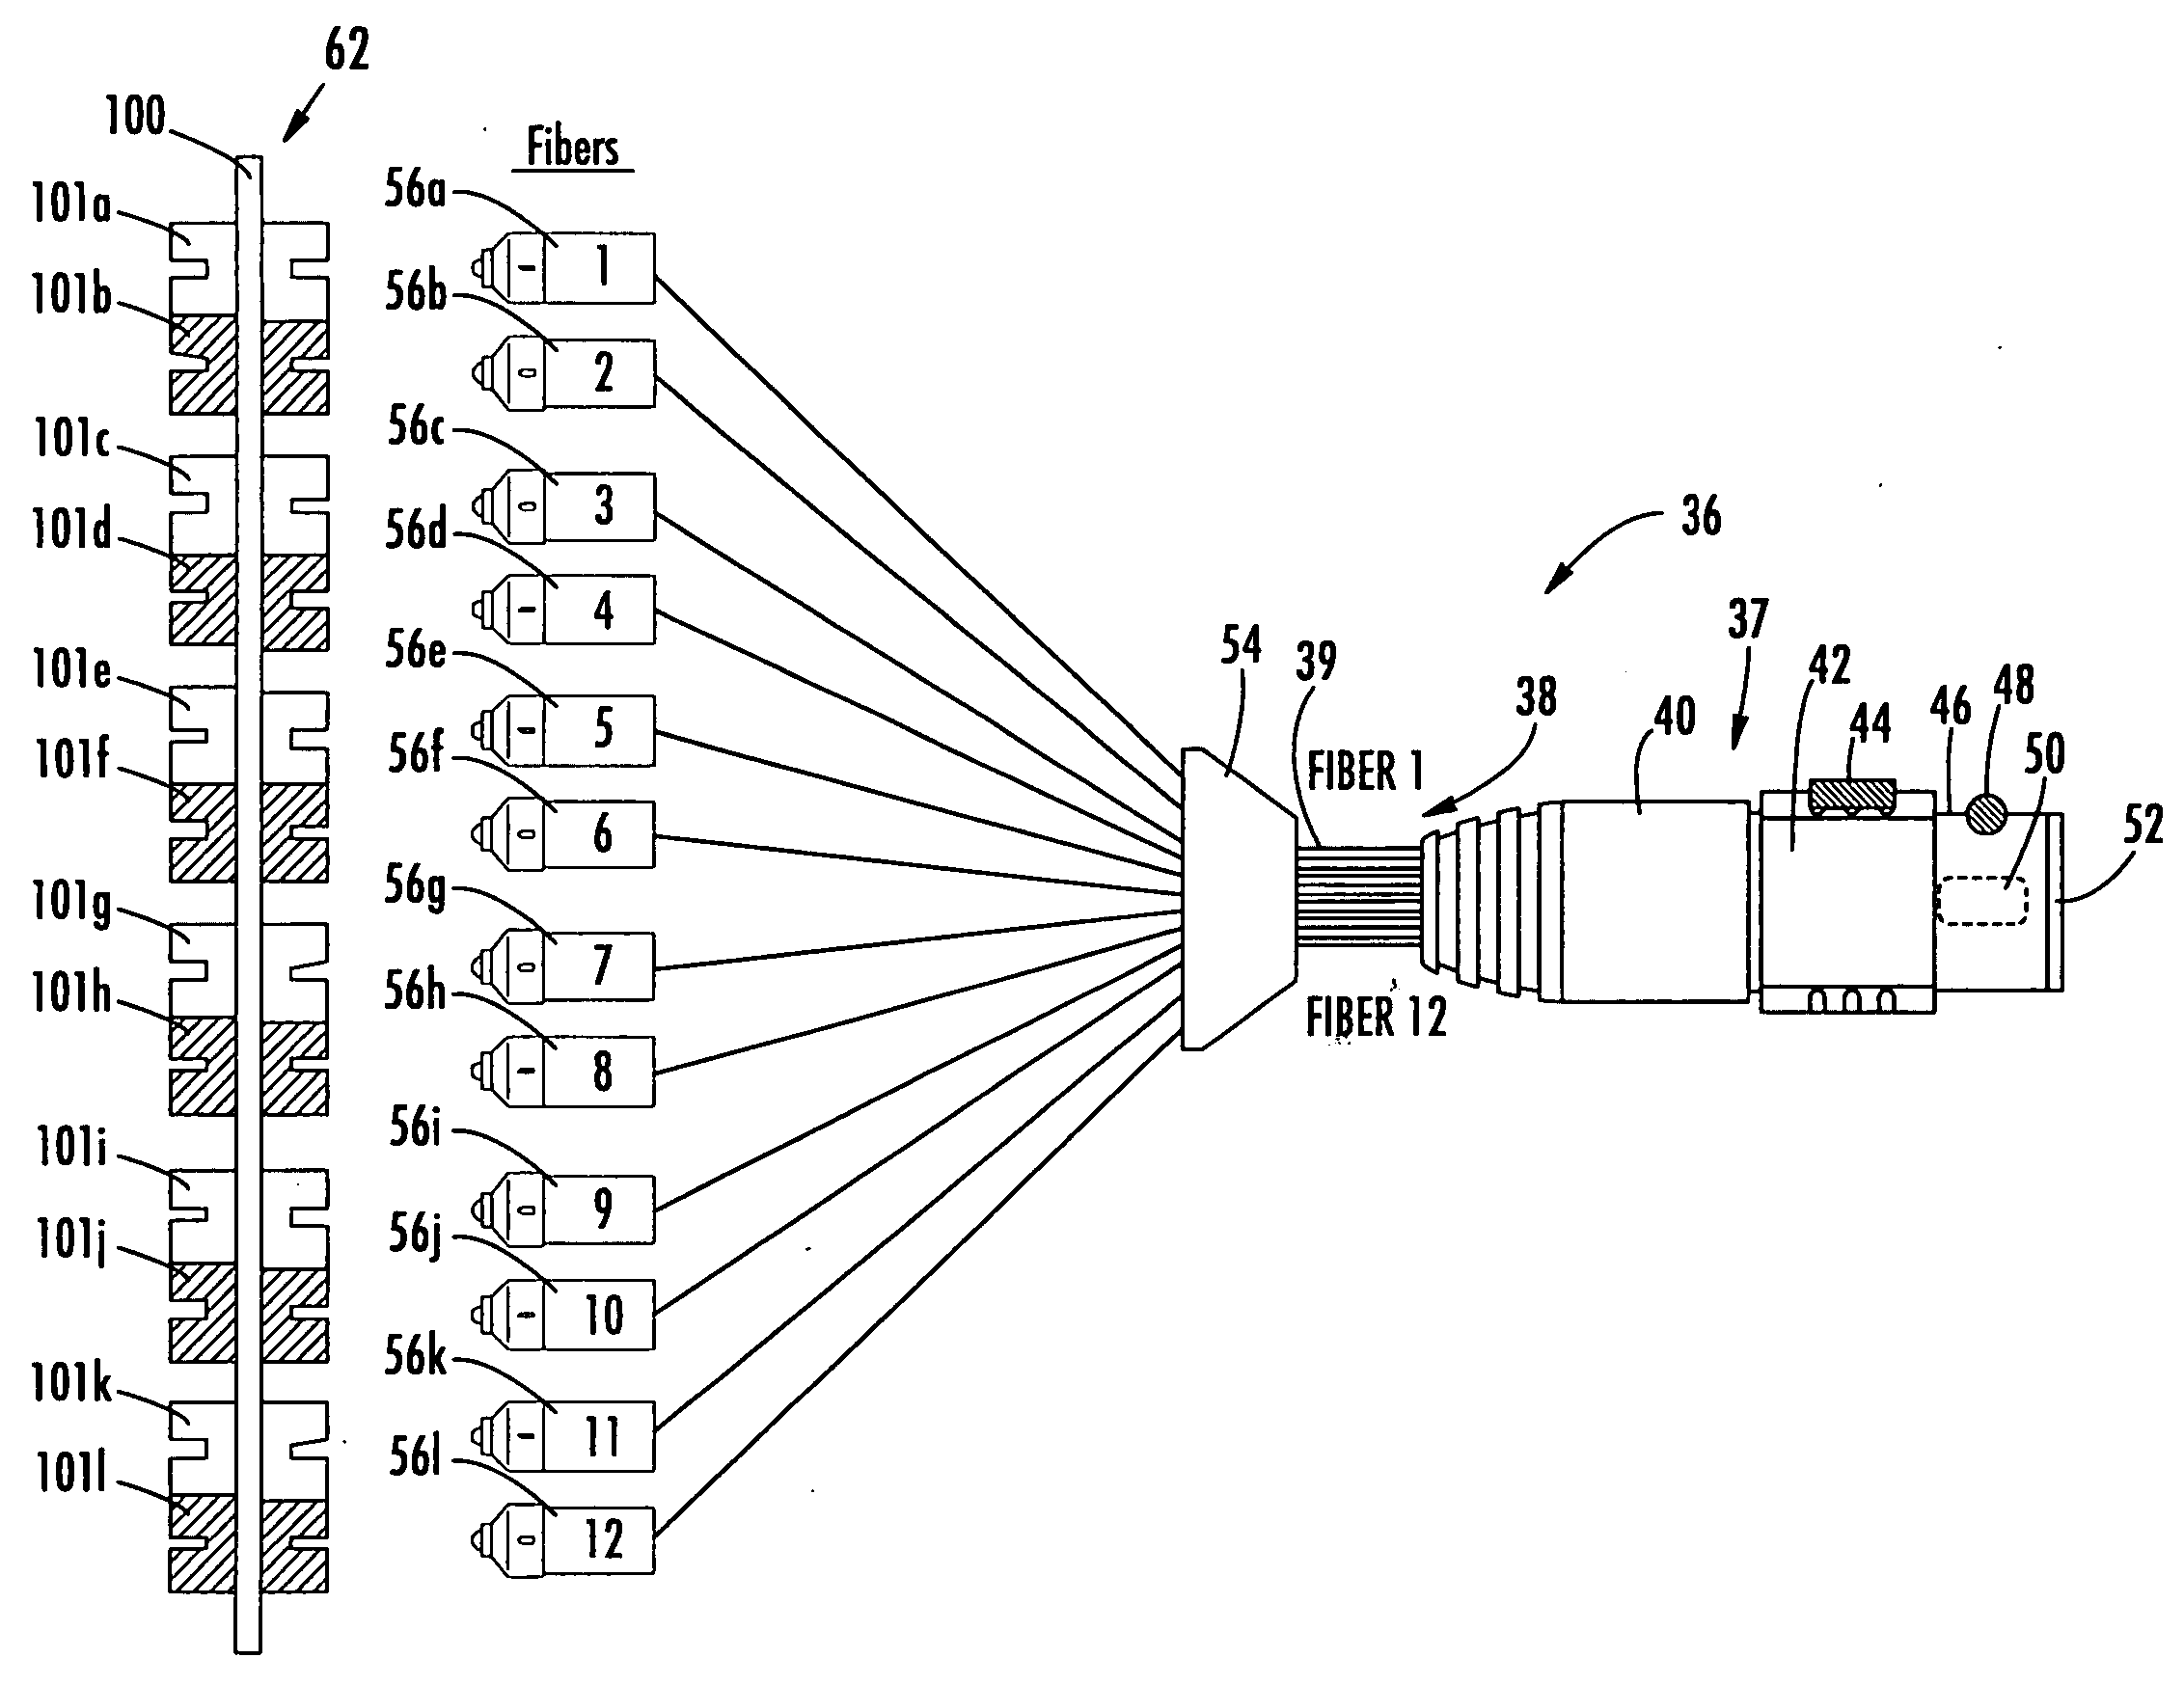 Optical fiber array connectivity system with indicia to facilitate connectivity in four orientations for dual functionality